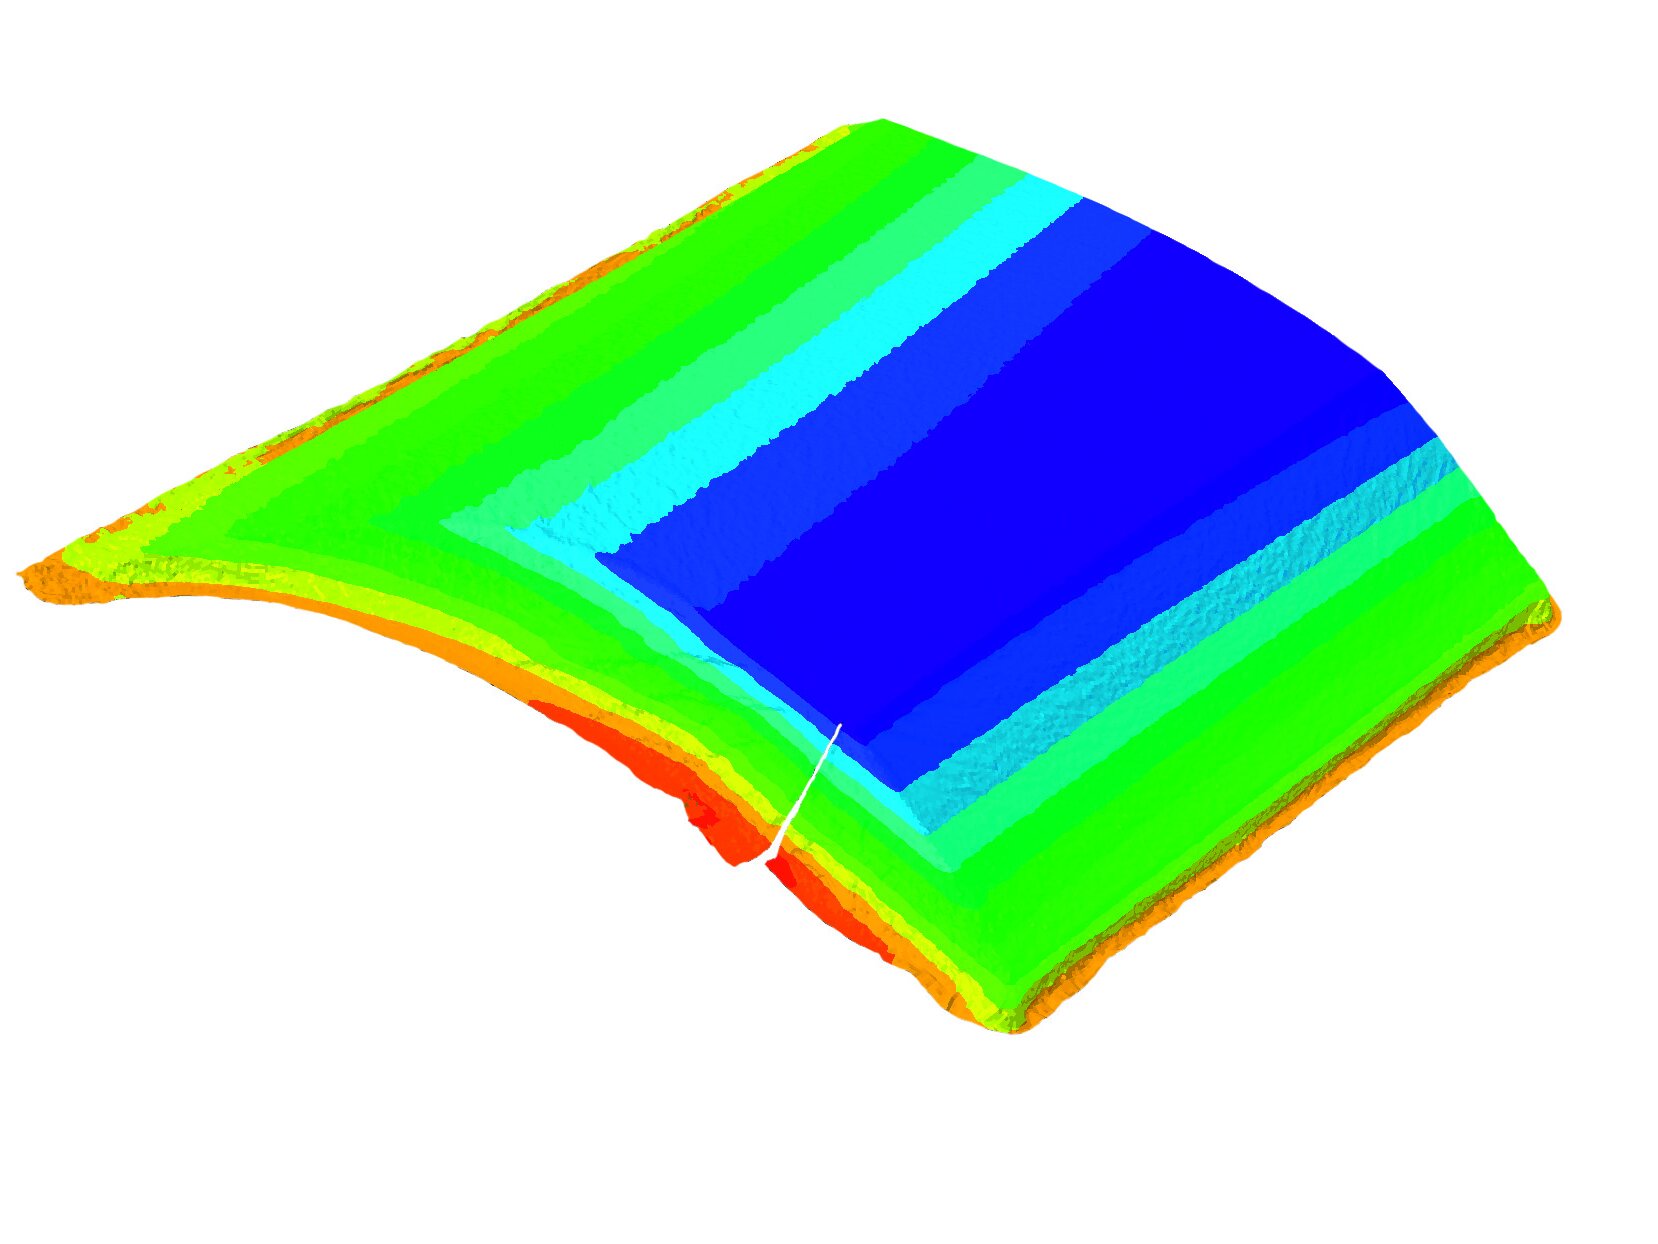 Process simulation in the LAC for you lightweight solution